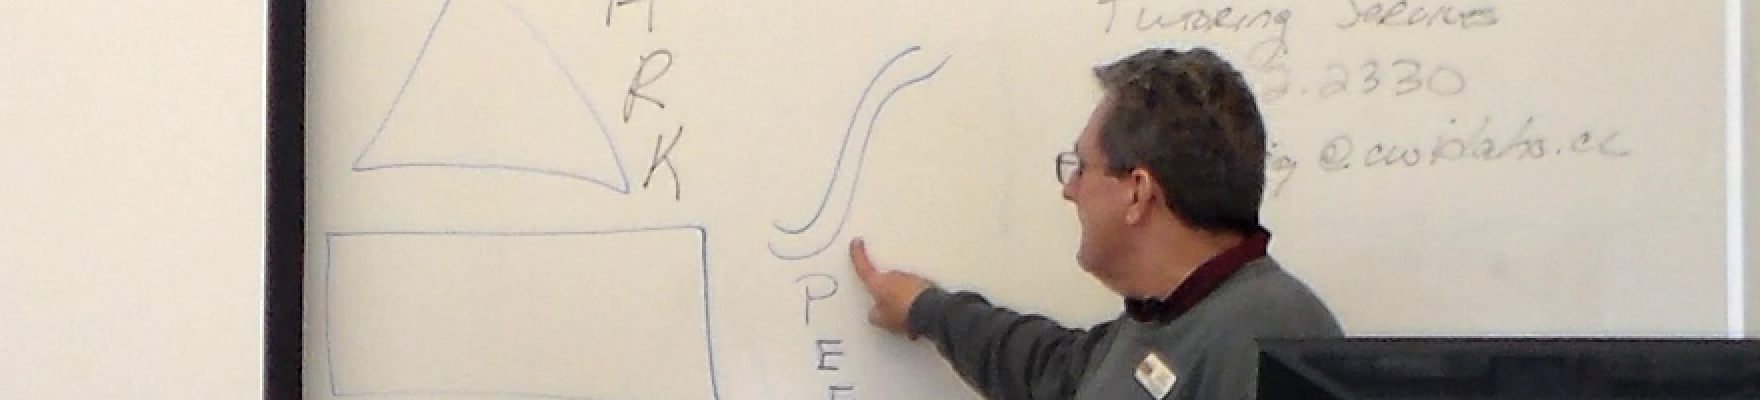 Image of instructor at whiteboard